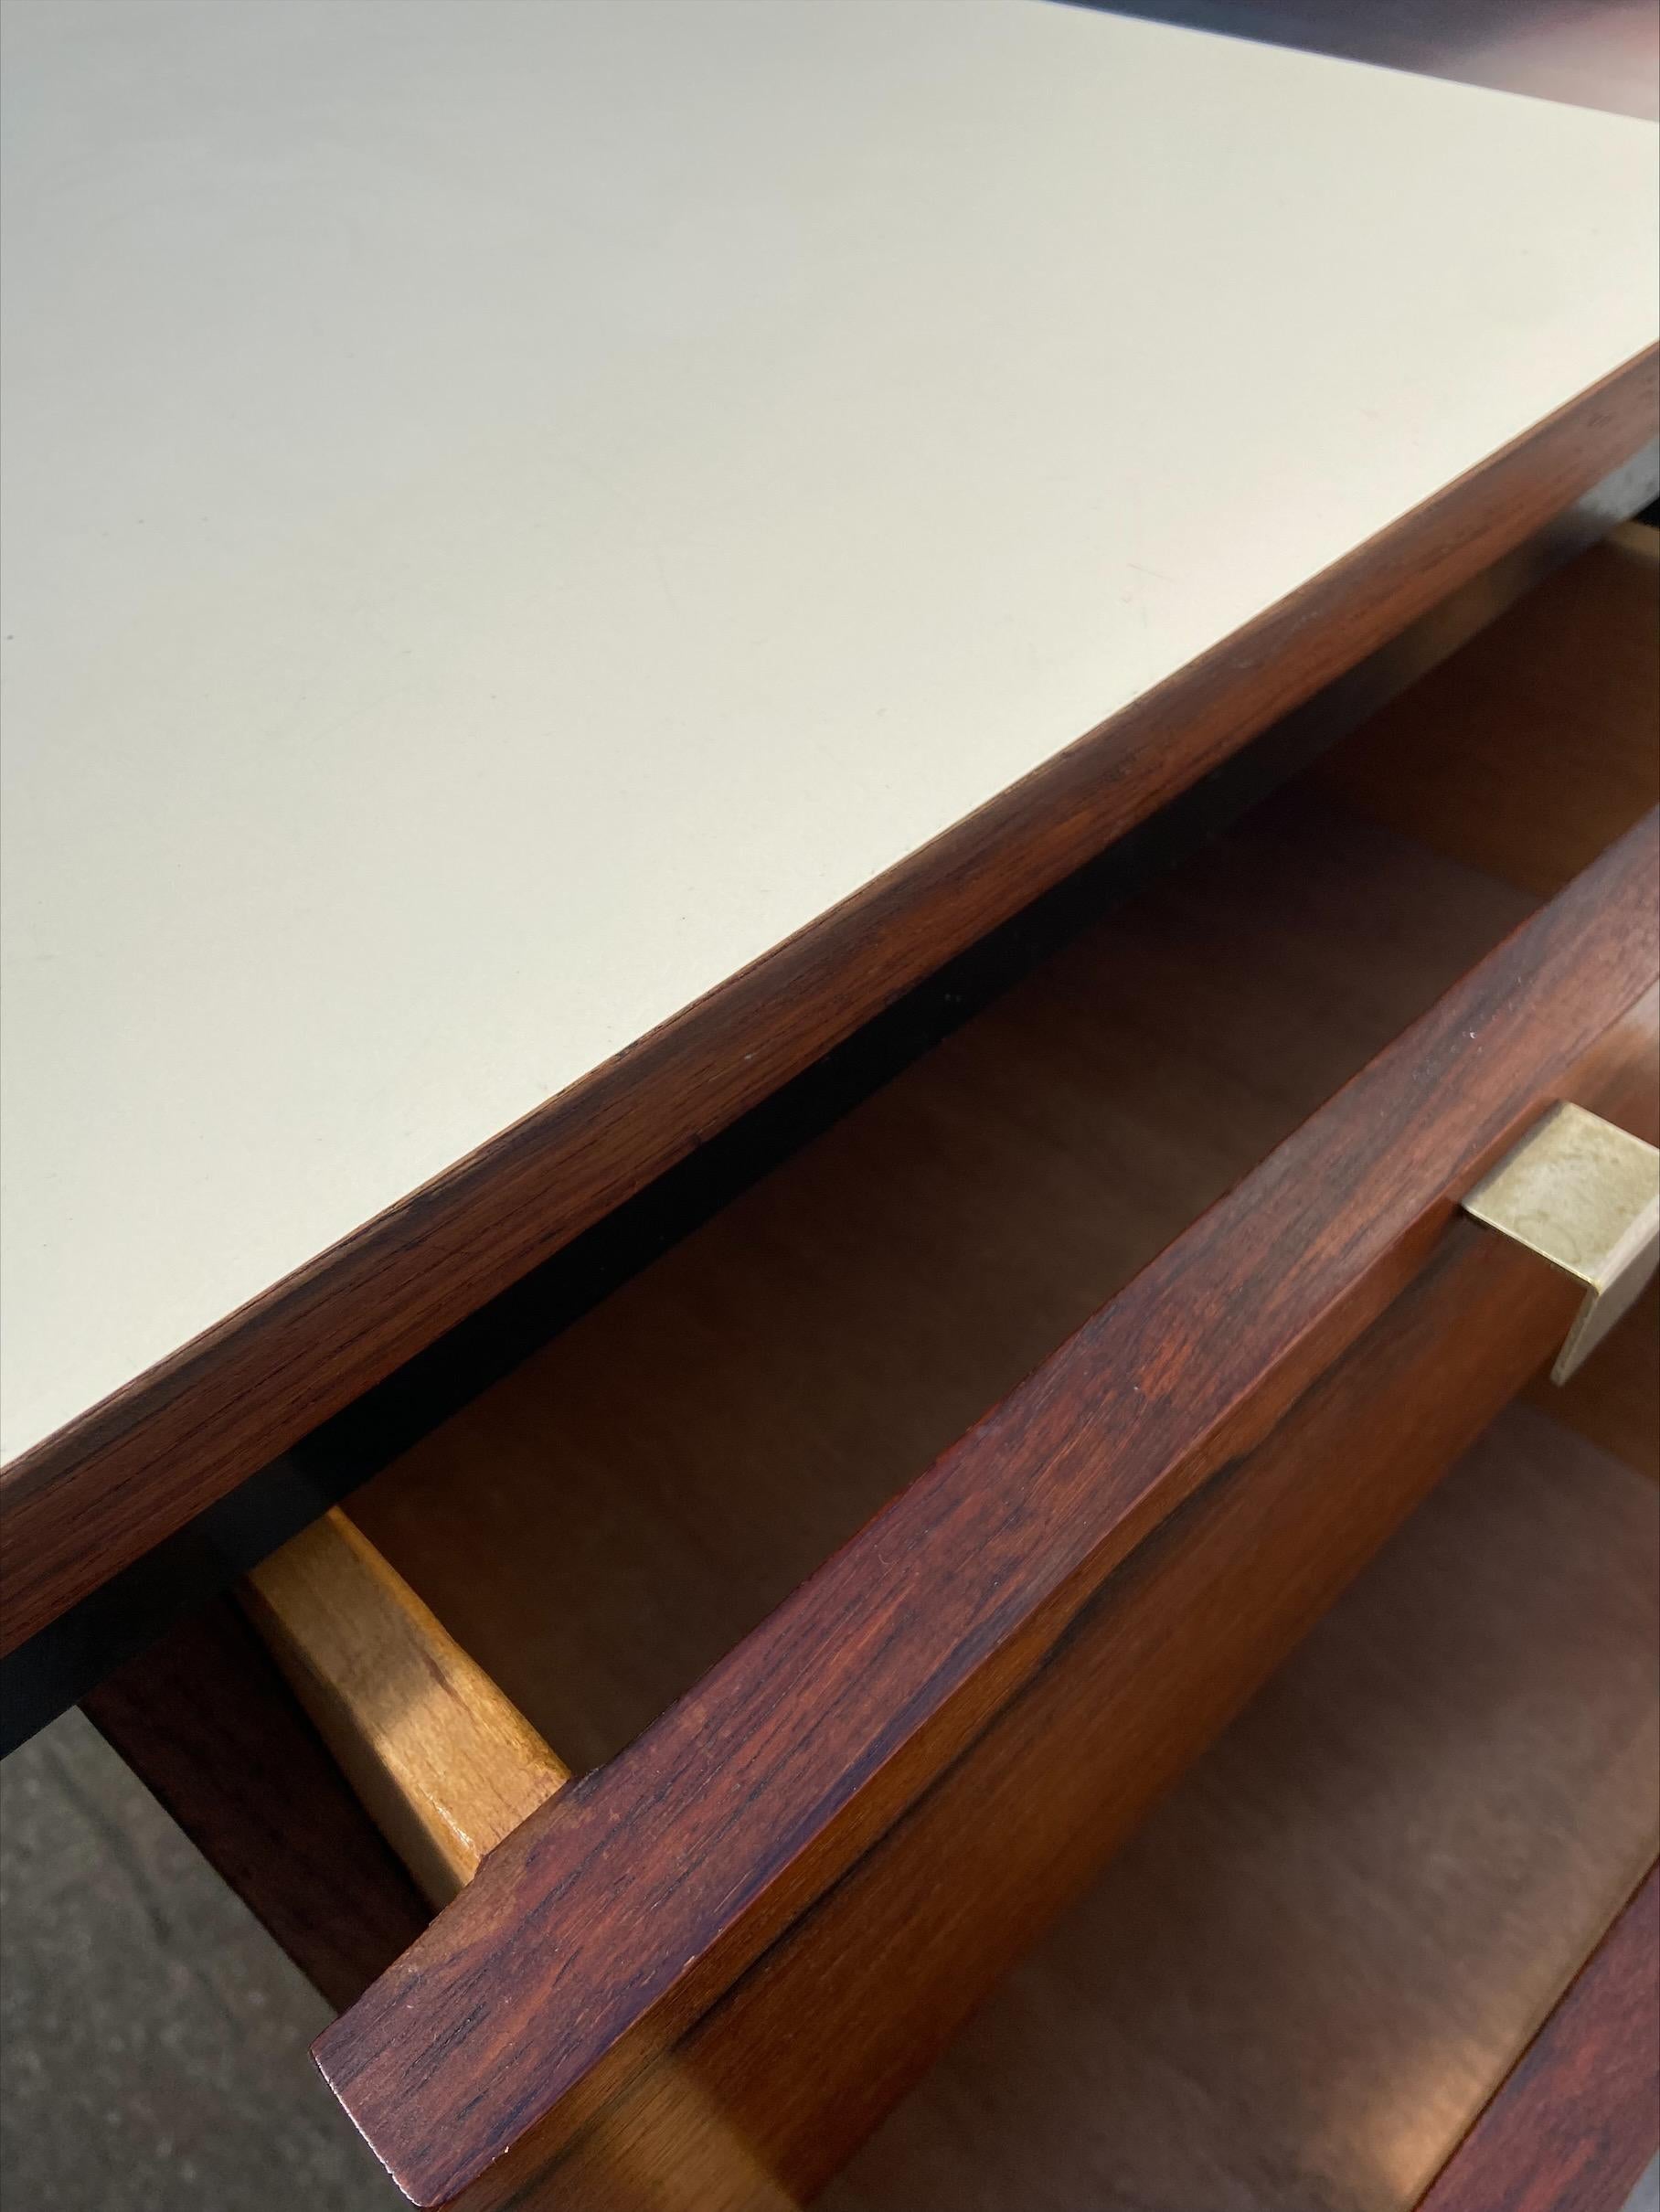 Office - Pierre Paulin 
Minvielle edition 
H72xW100xD60cm
Circa 1955
Rosewood, melamine and wood
Very good condition 
2800€.
 